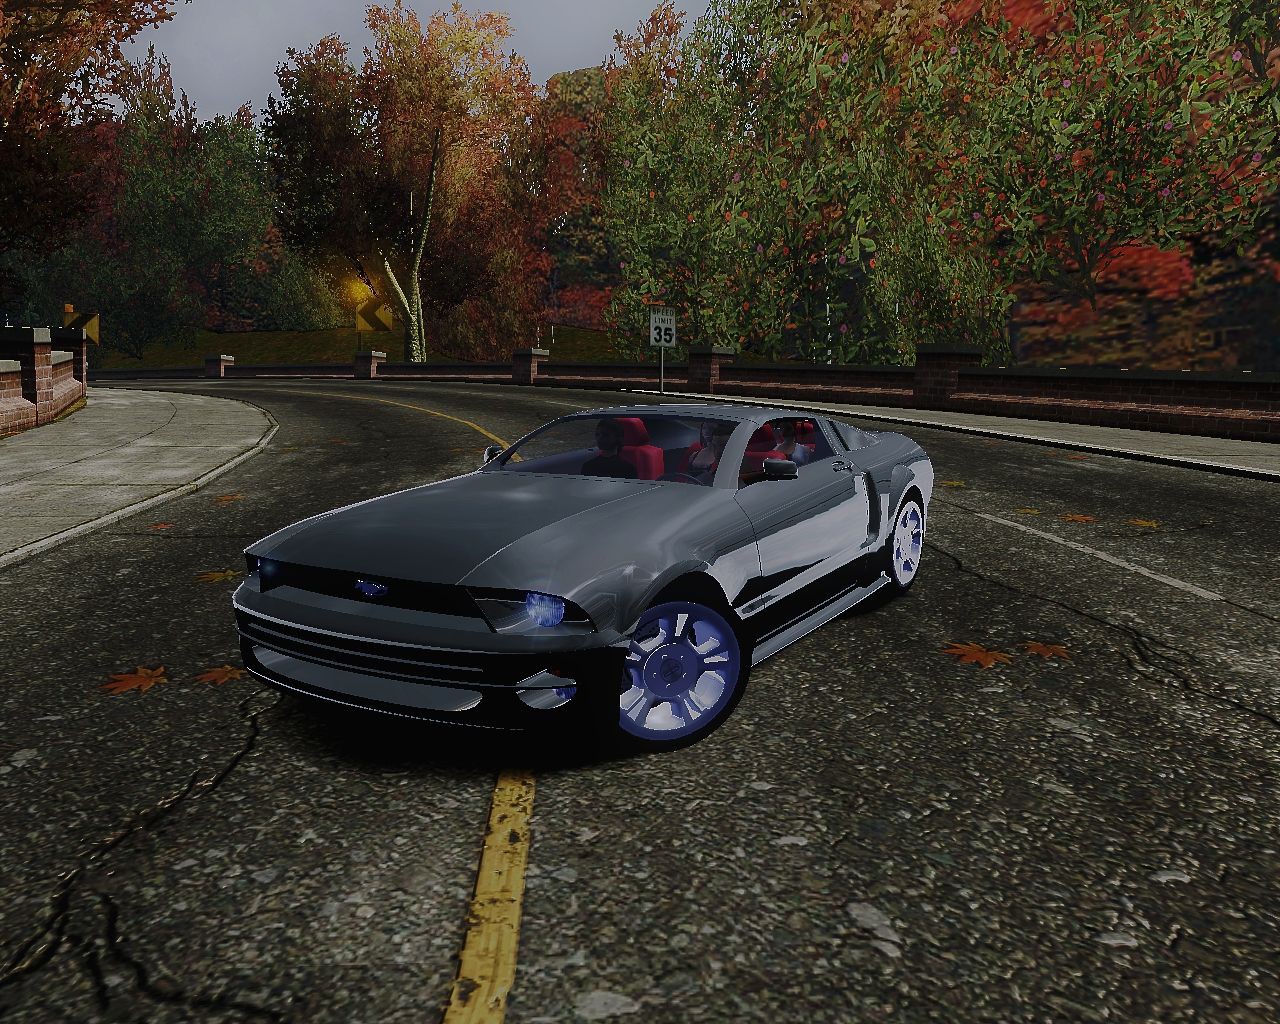 Nfs mods cars. Форд Мустанг 2003 gt NFS MW. Ford Mustang Underground 2. Мустанг NFS карбон. NFS Carbon Ford Mustang.